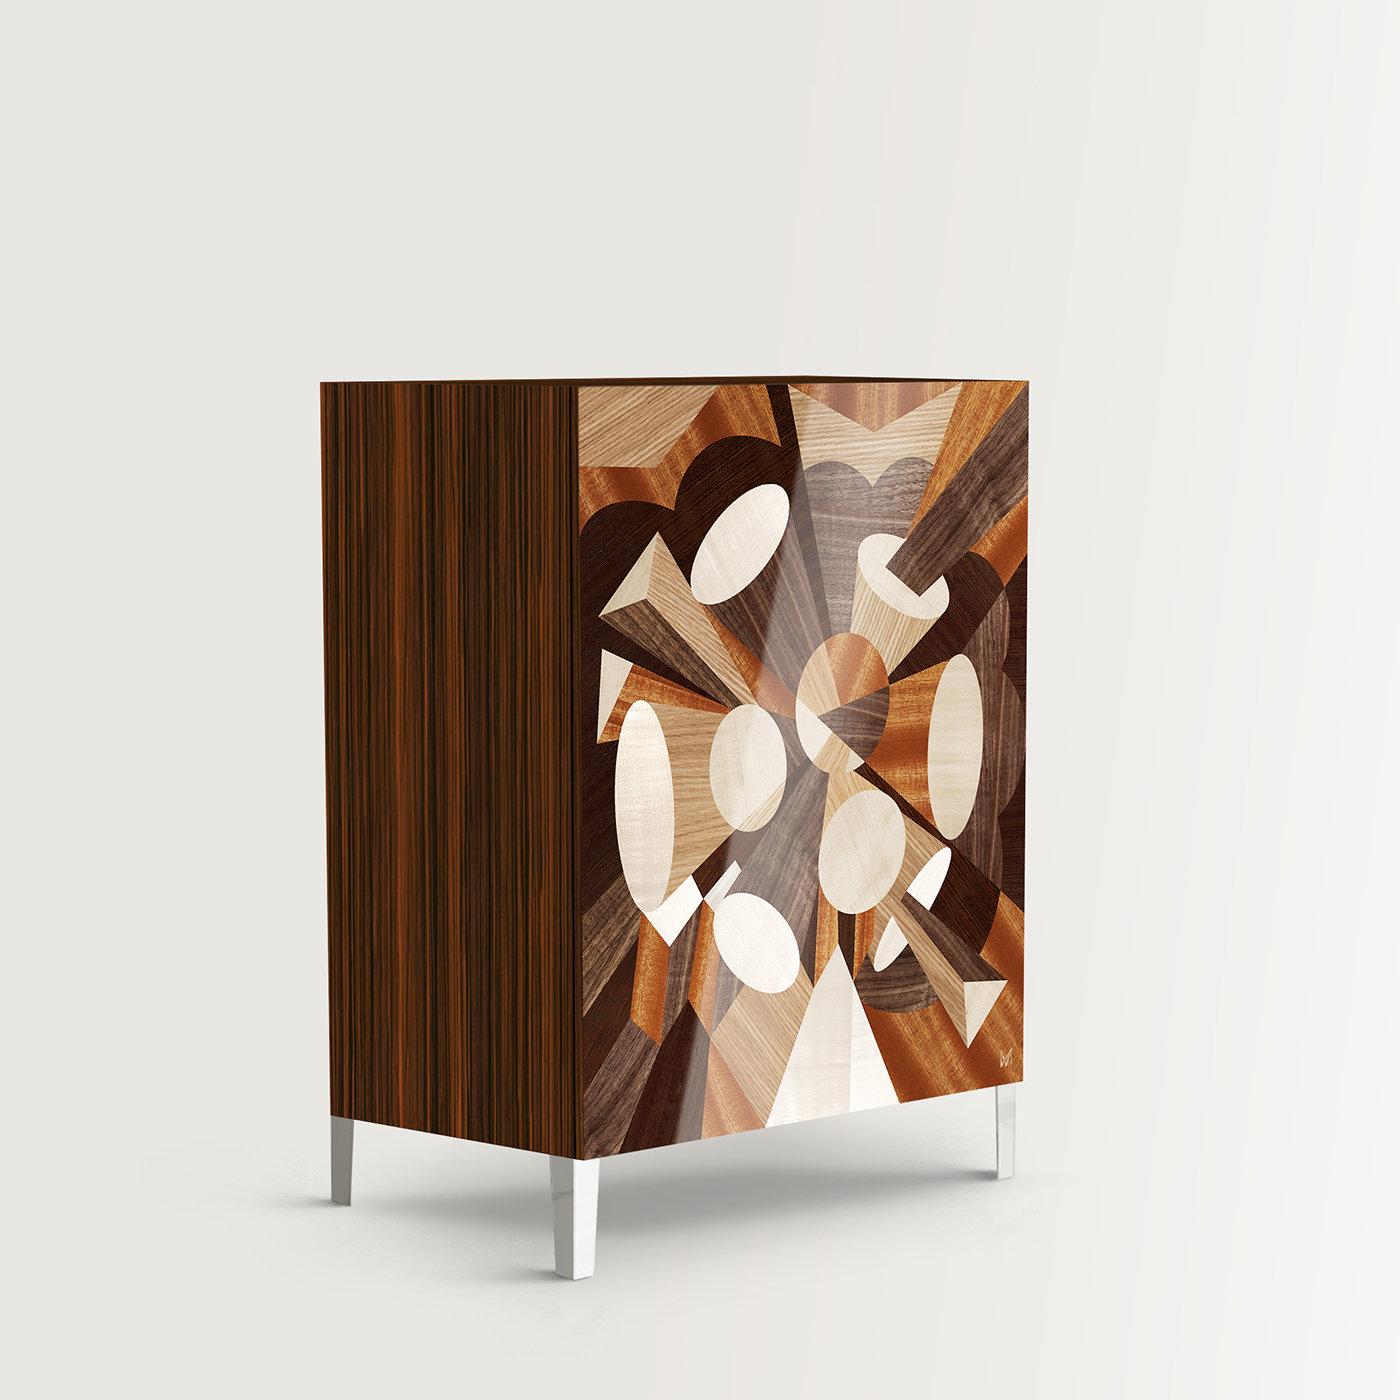 Part of the Classica Collection, this cabinet will stand out in any interior, providing sophisticated style in a living, dining room, and bedroom. The rectangular rosewood frame is raised on polished steel feet, its metallic finish occuring in the